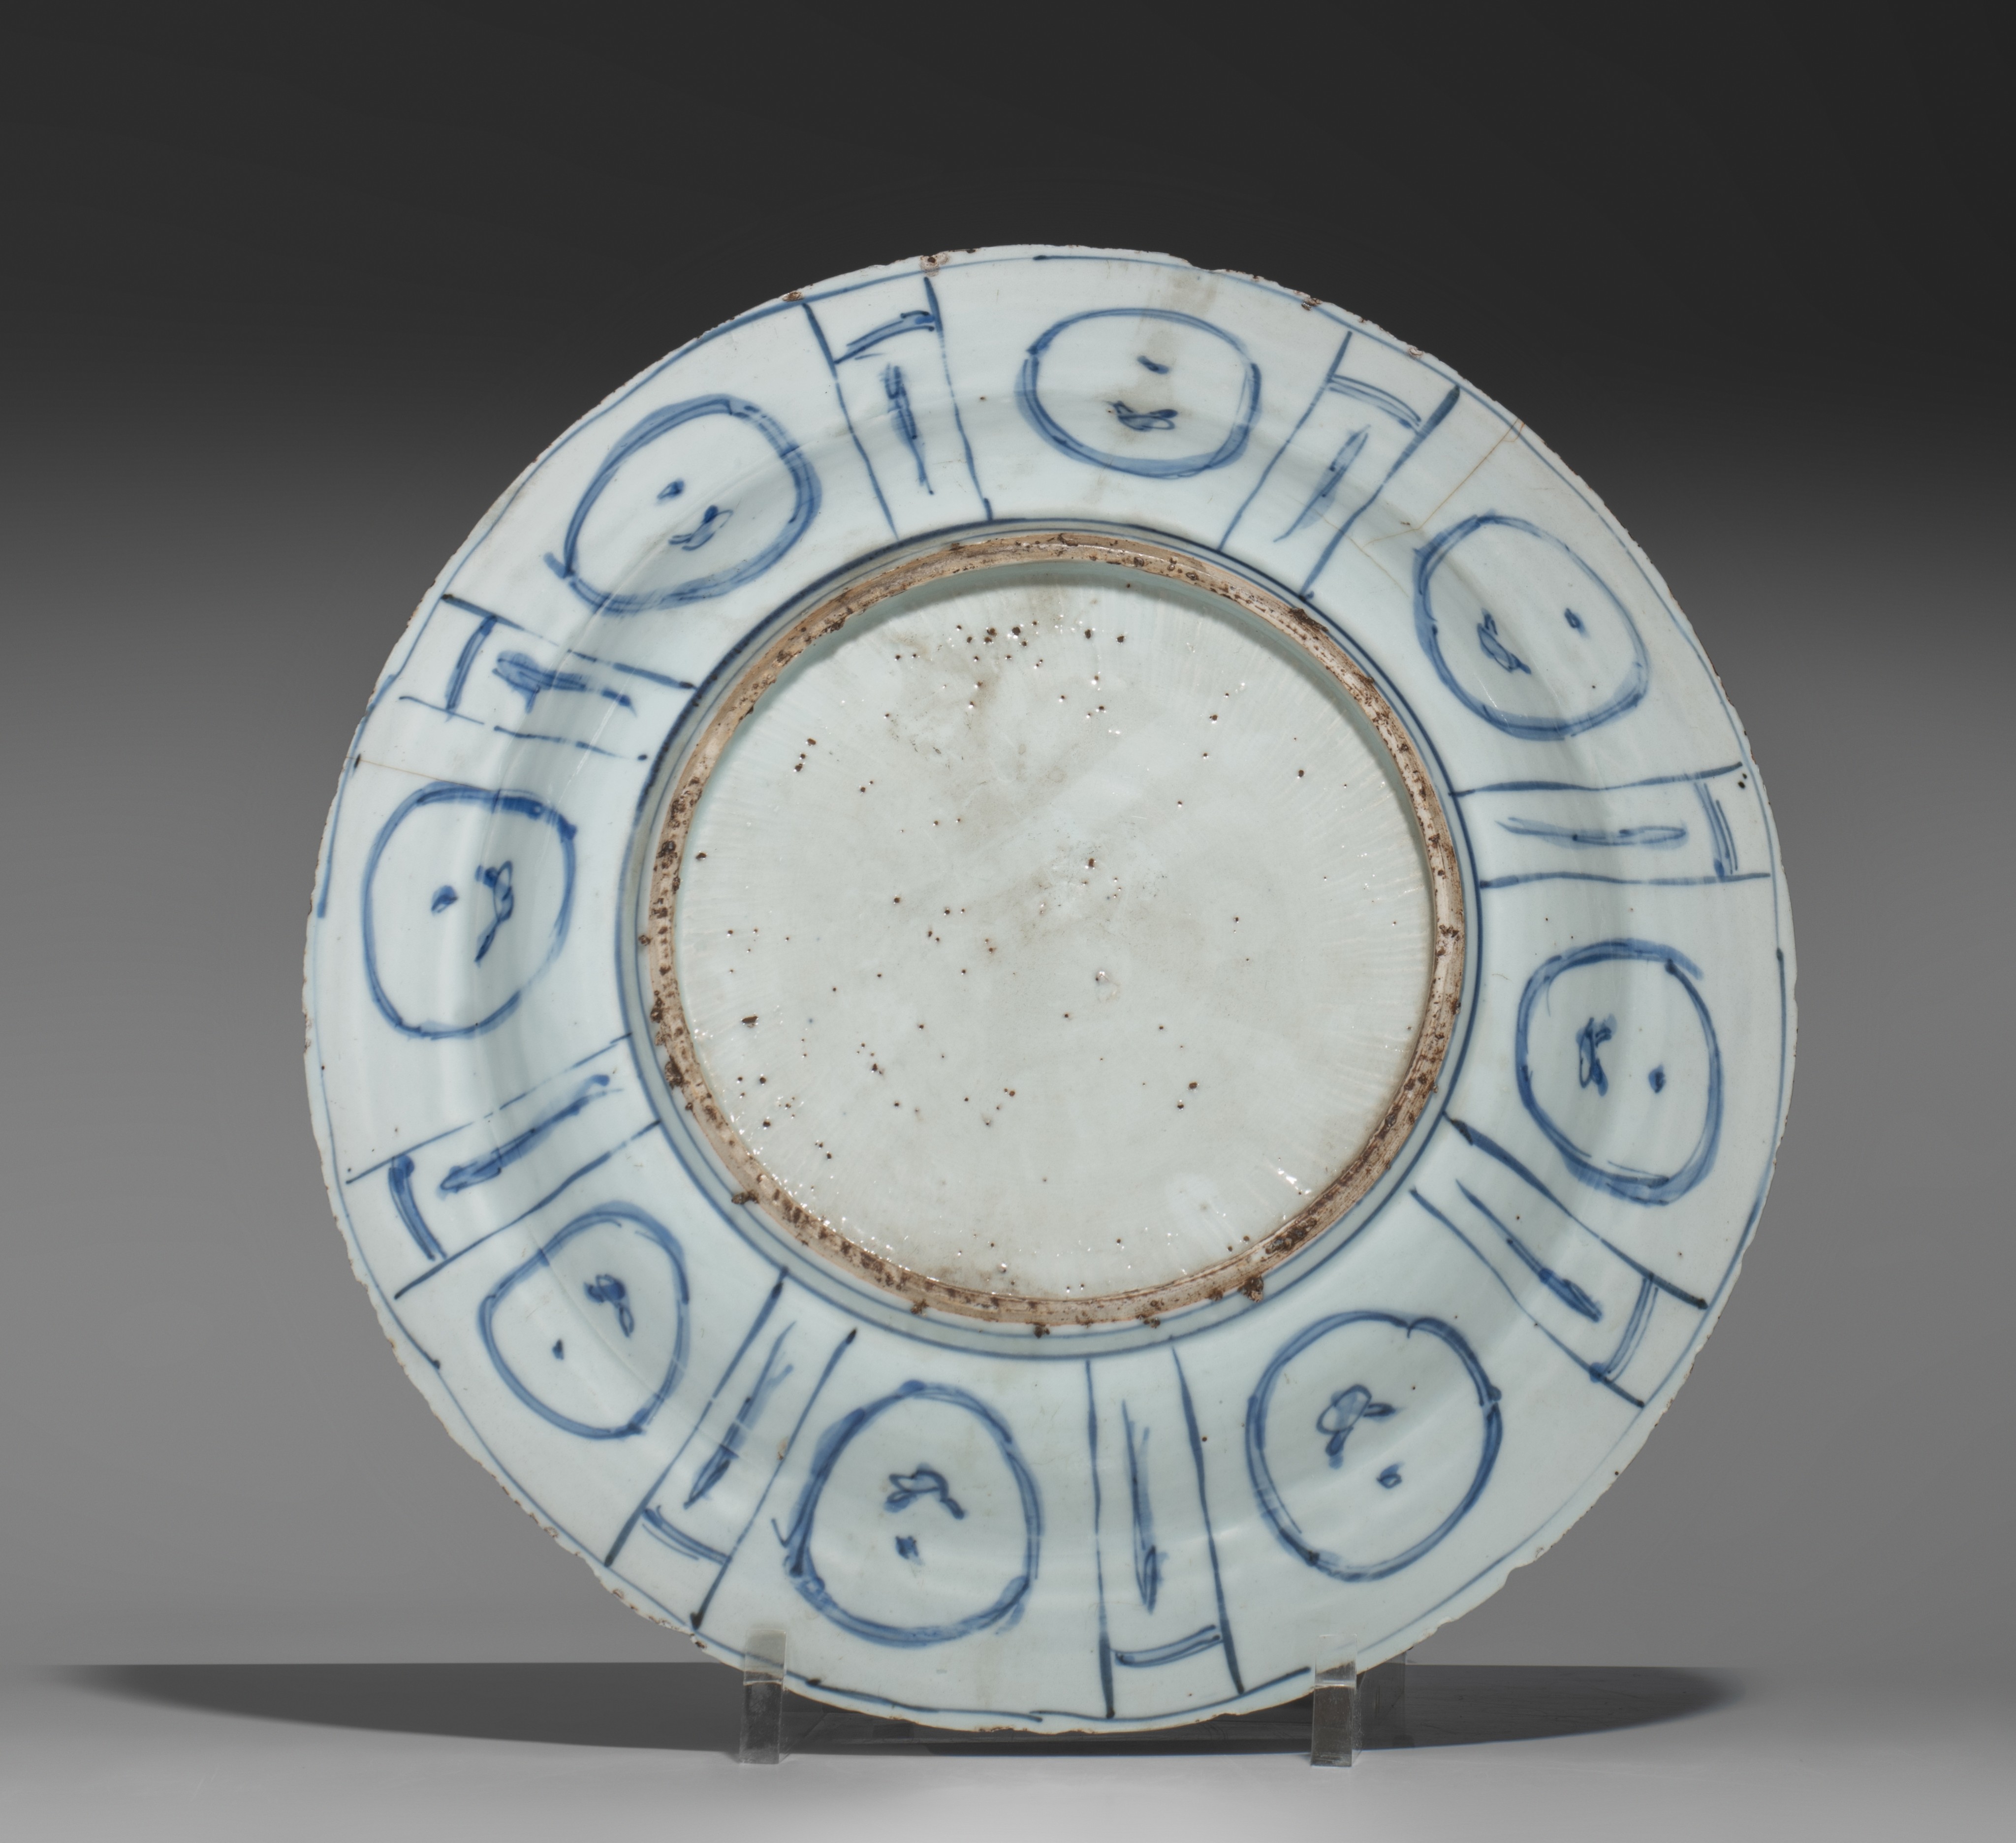 A collection of various Chinese export porcelain plates, Wanli, Qianlong and Guangxu period, ø 22 - - Image 3 of 11